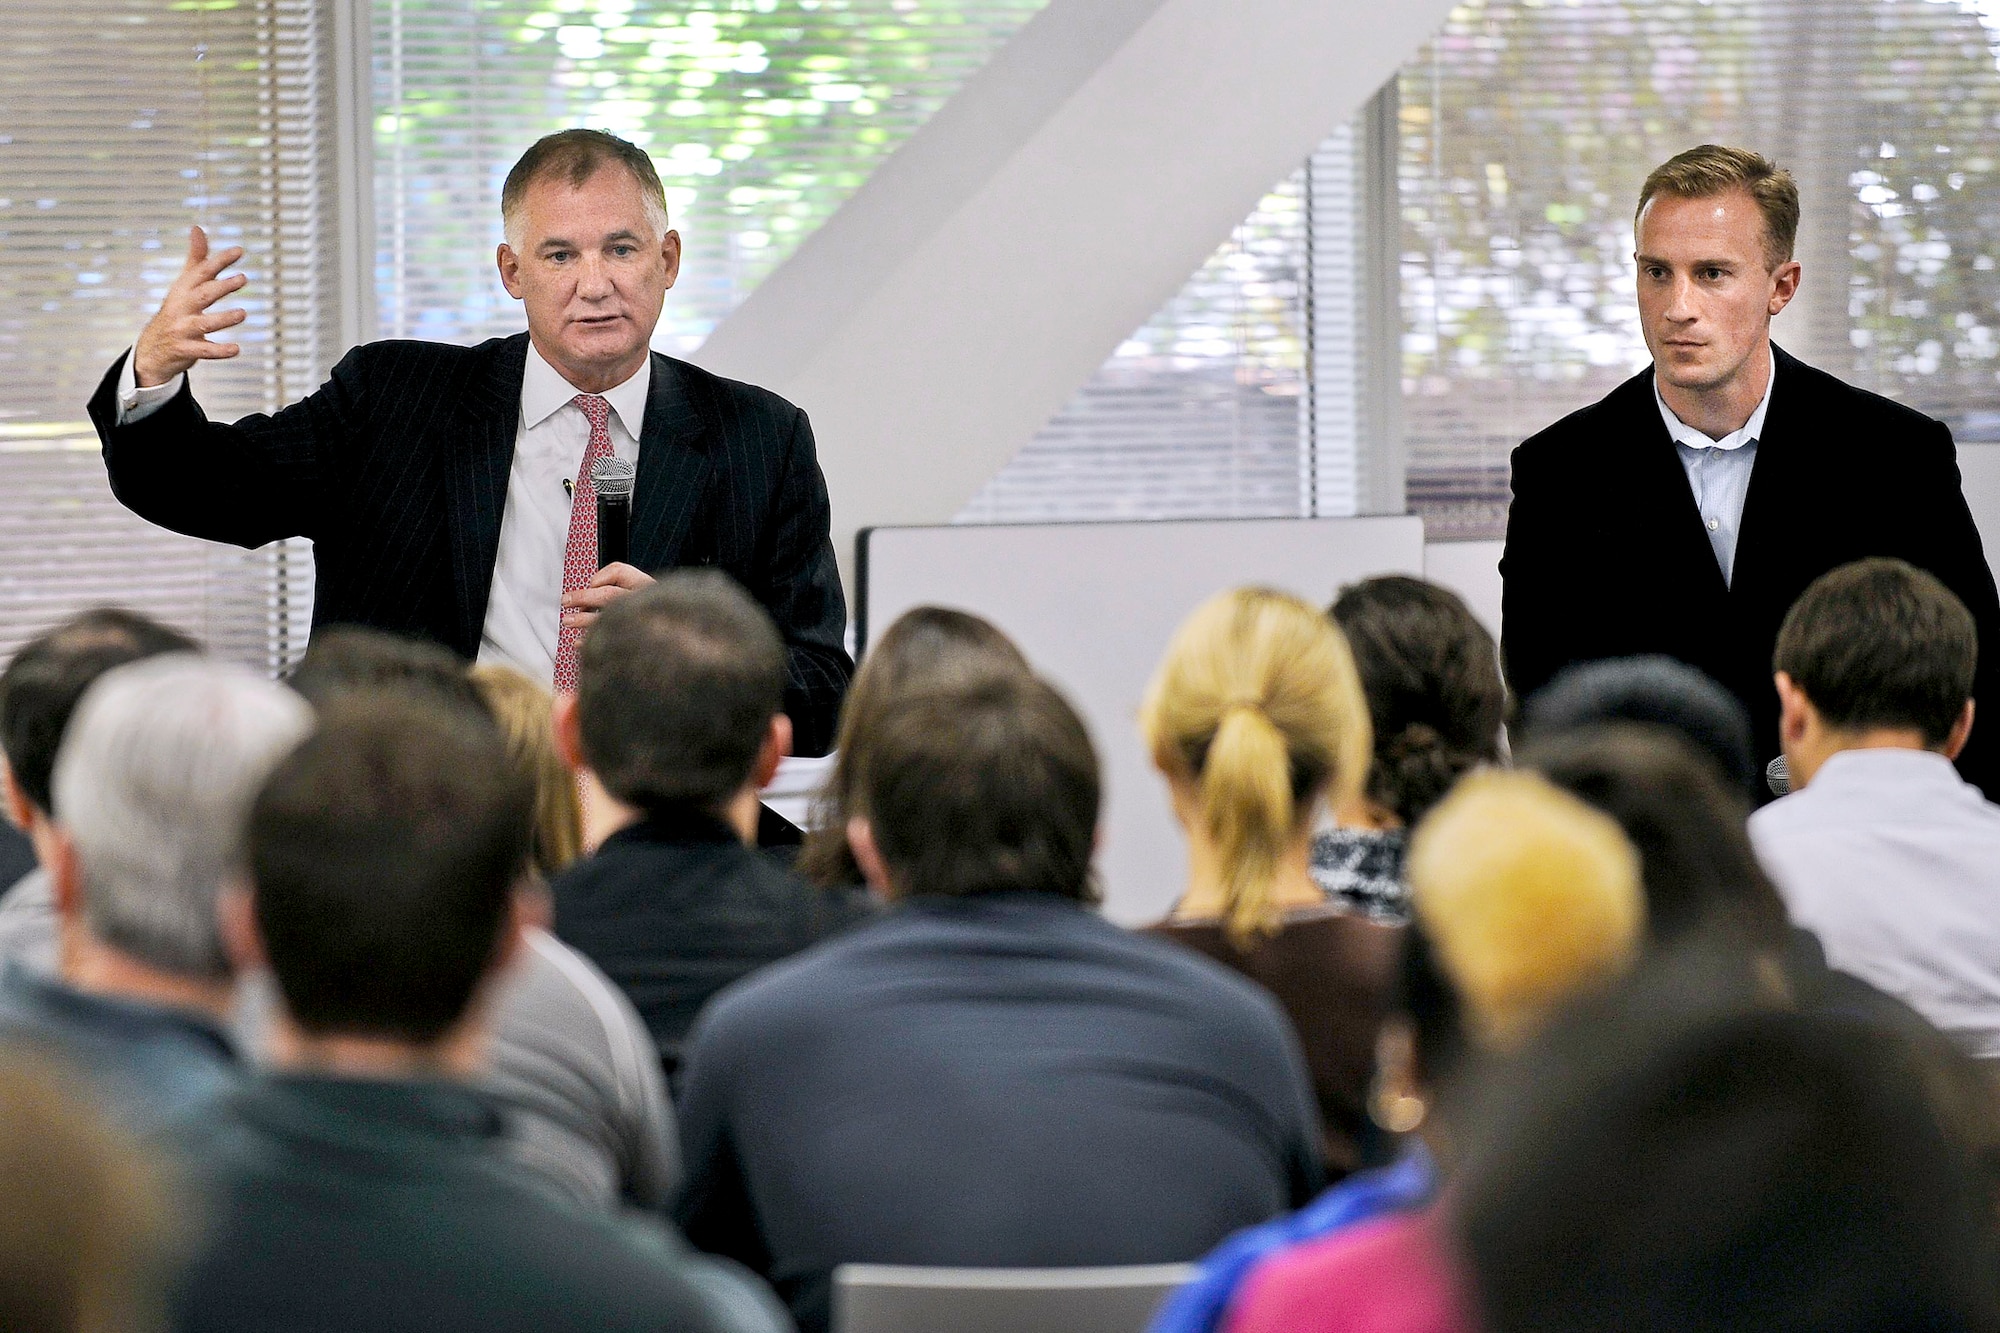 Deputy Defense Secretary William J. Lynn III (left) and former Marine Don Faul, director of online operations for the Facebook social media website, talk to Facebook employees in Silicon Valley, Calif., April 28, 2010.  (Defense Department photo/ Master Sgt. Jerry Morrison)